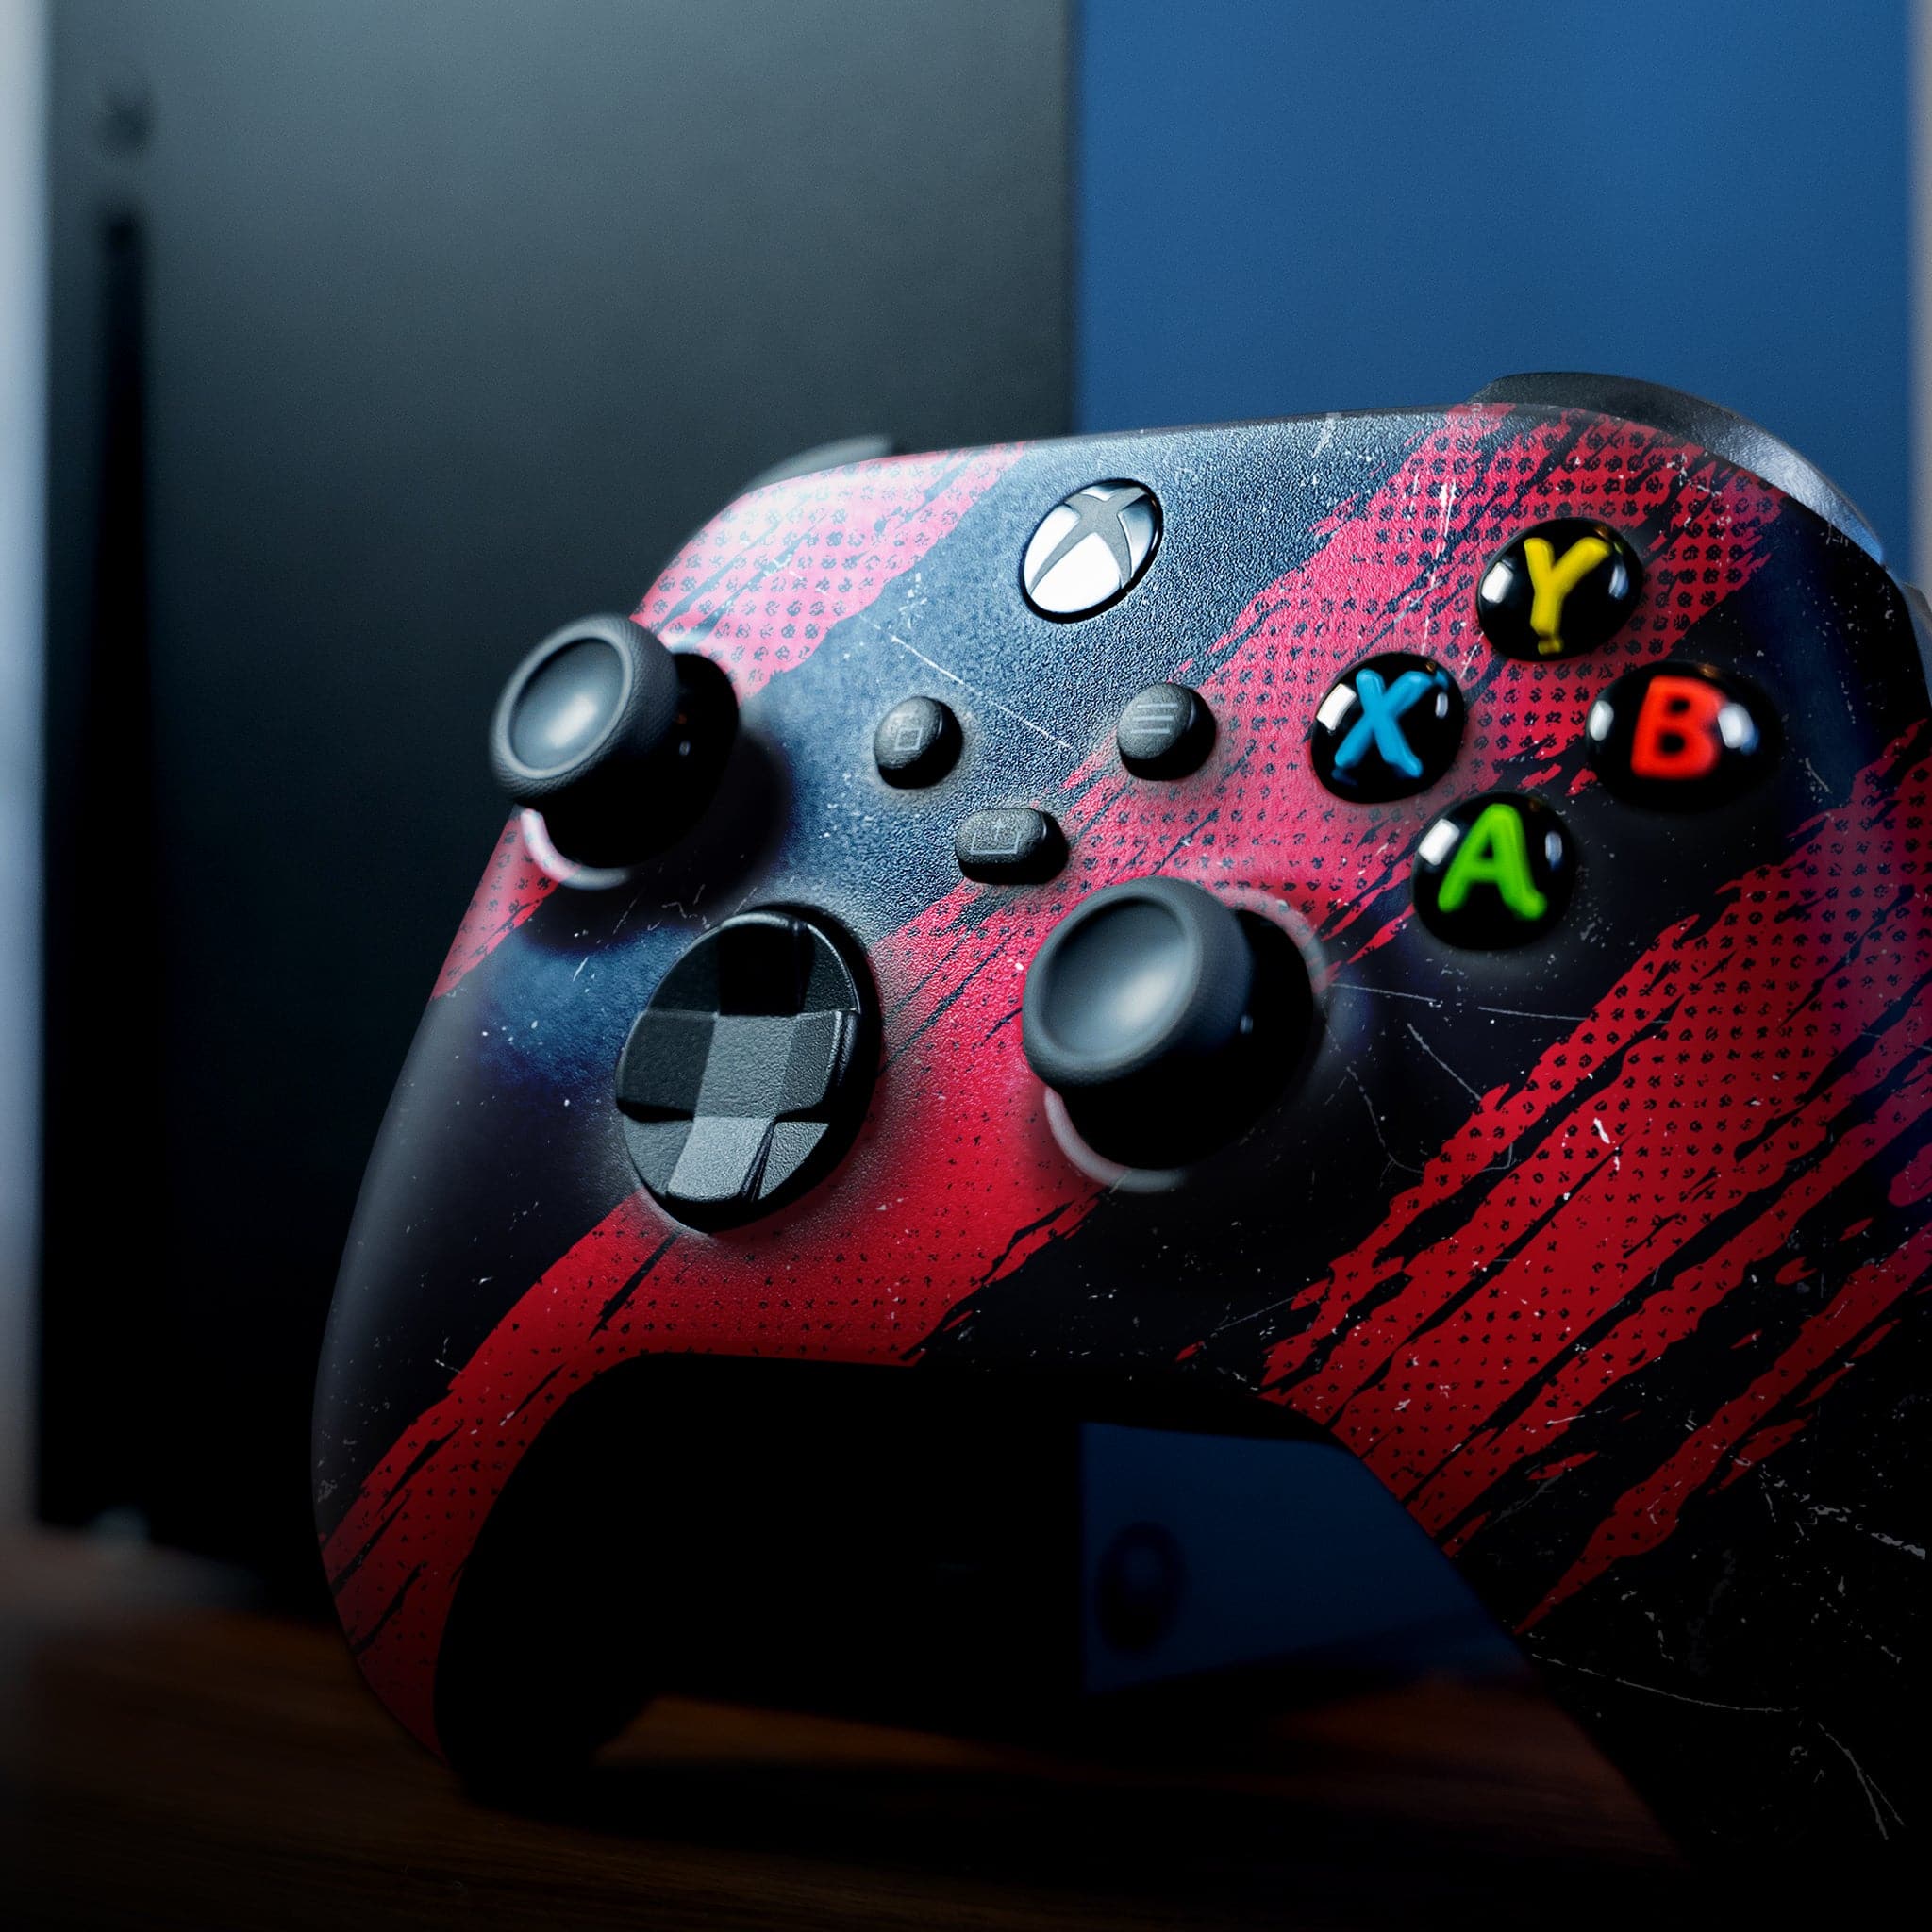 Ripper red xbox series x controller